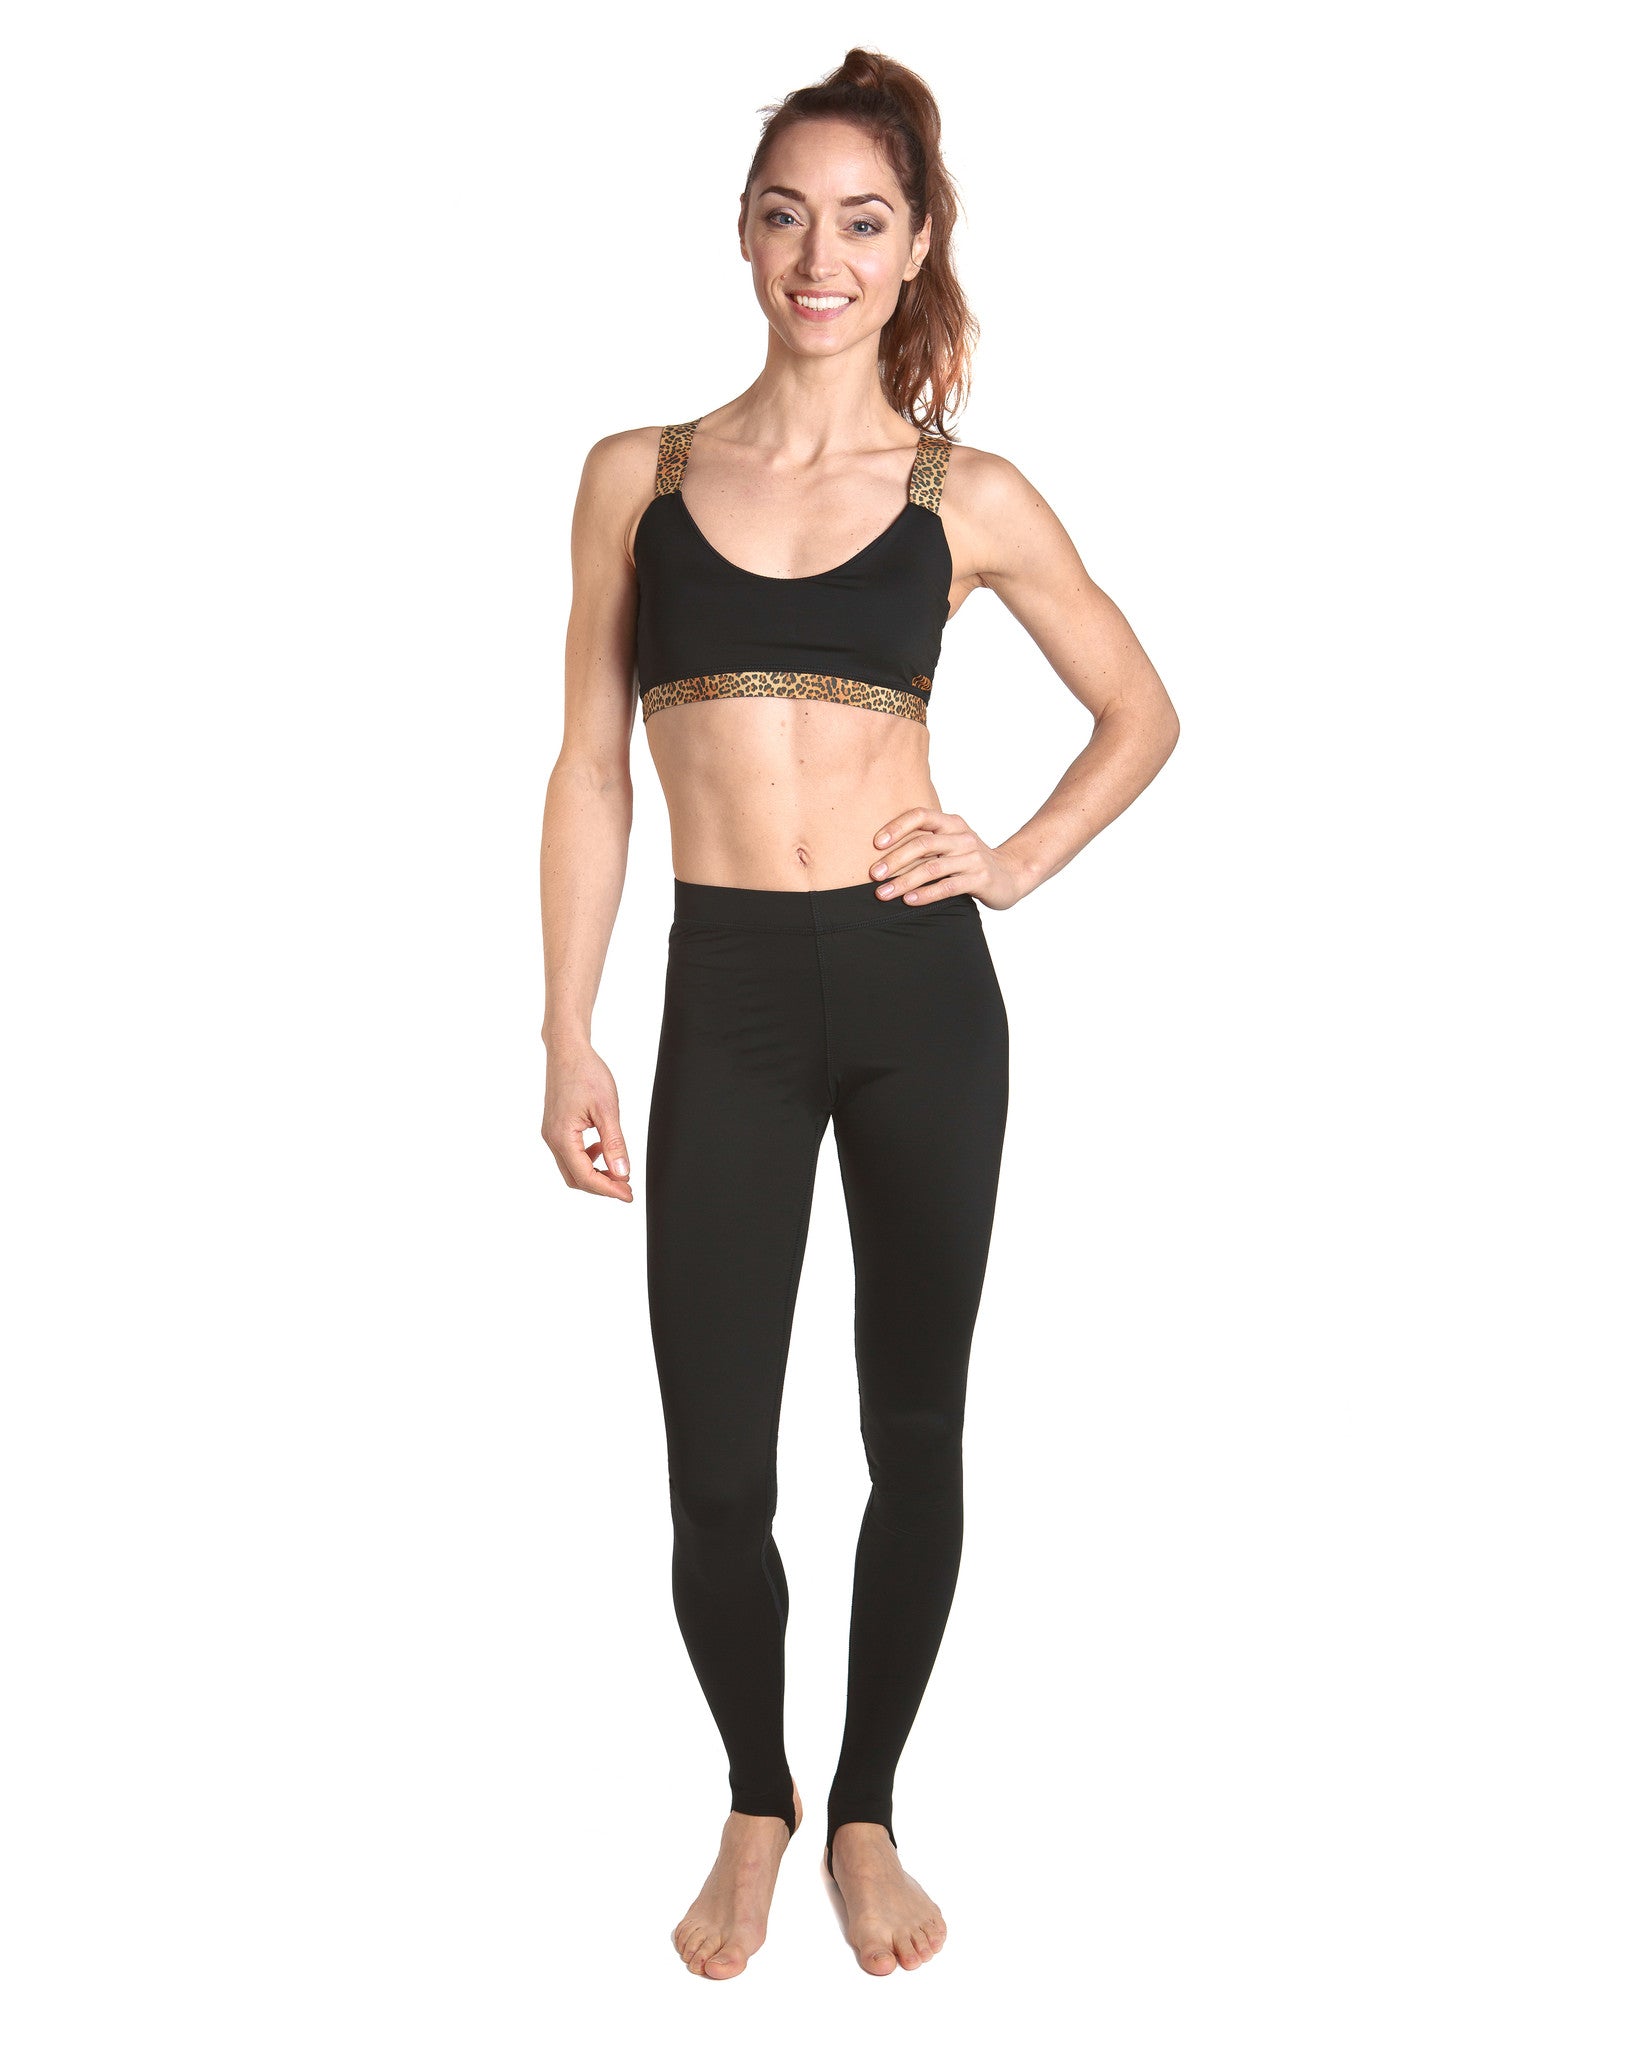 Leggings - Black with leopard print trims - Designed for cycling, running,  yoga and gym - Quality Italian sculpting fabric - Designed by LPRD